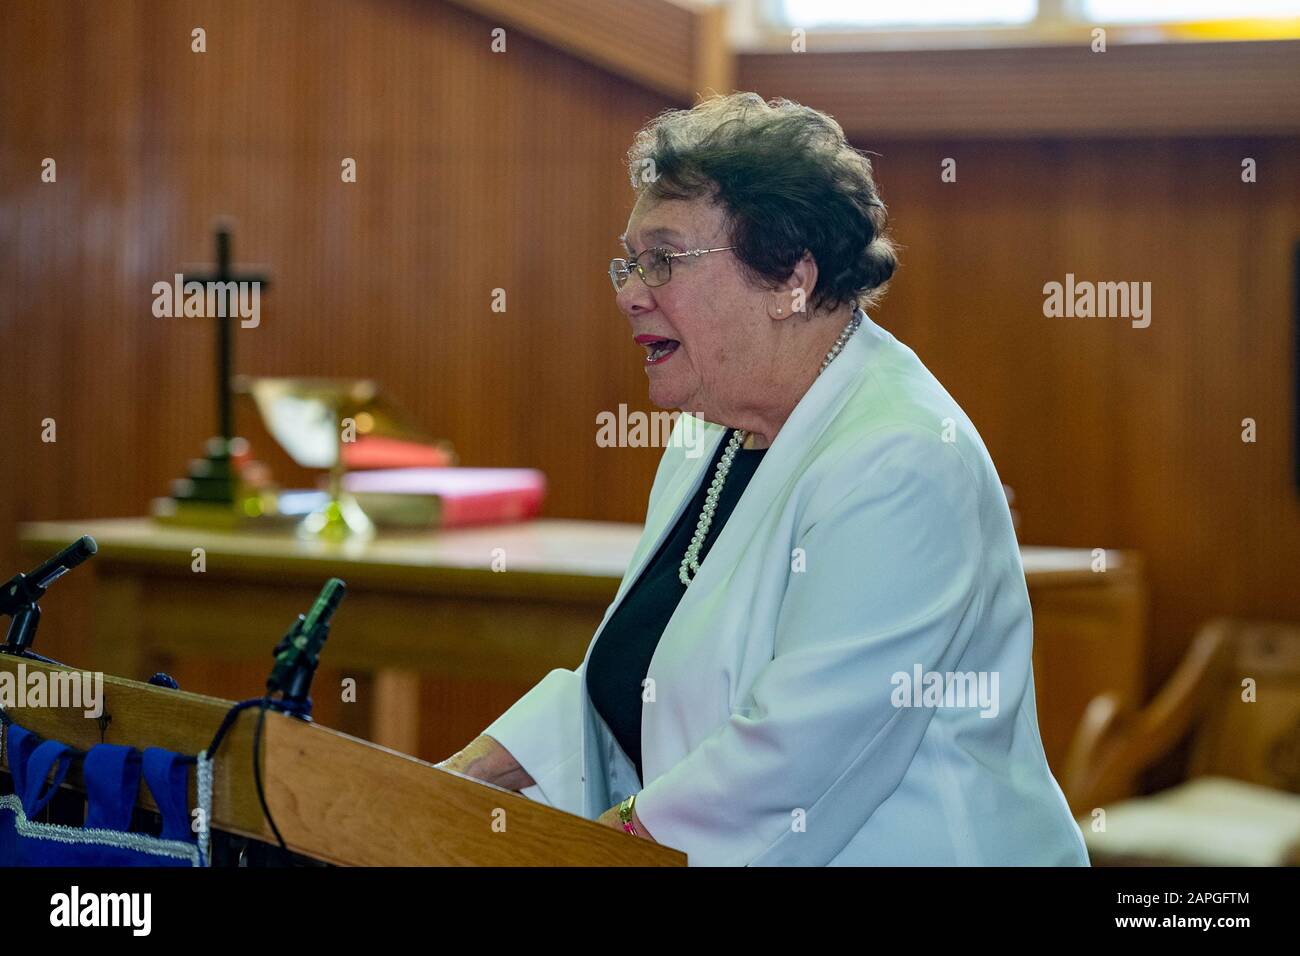 Brentwood Essex, UK. 23rd Jan, 2020. A public meeting commemorating the 75th anniversary of the liveration of Auschwitz-Birkenau with spekaer Susie Barnett BEM a Holocaust survivor, held at Brentwood United Reformed Church Brentwood Essex Credit: Ian Davidson/Alamy Live News Stock Photo